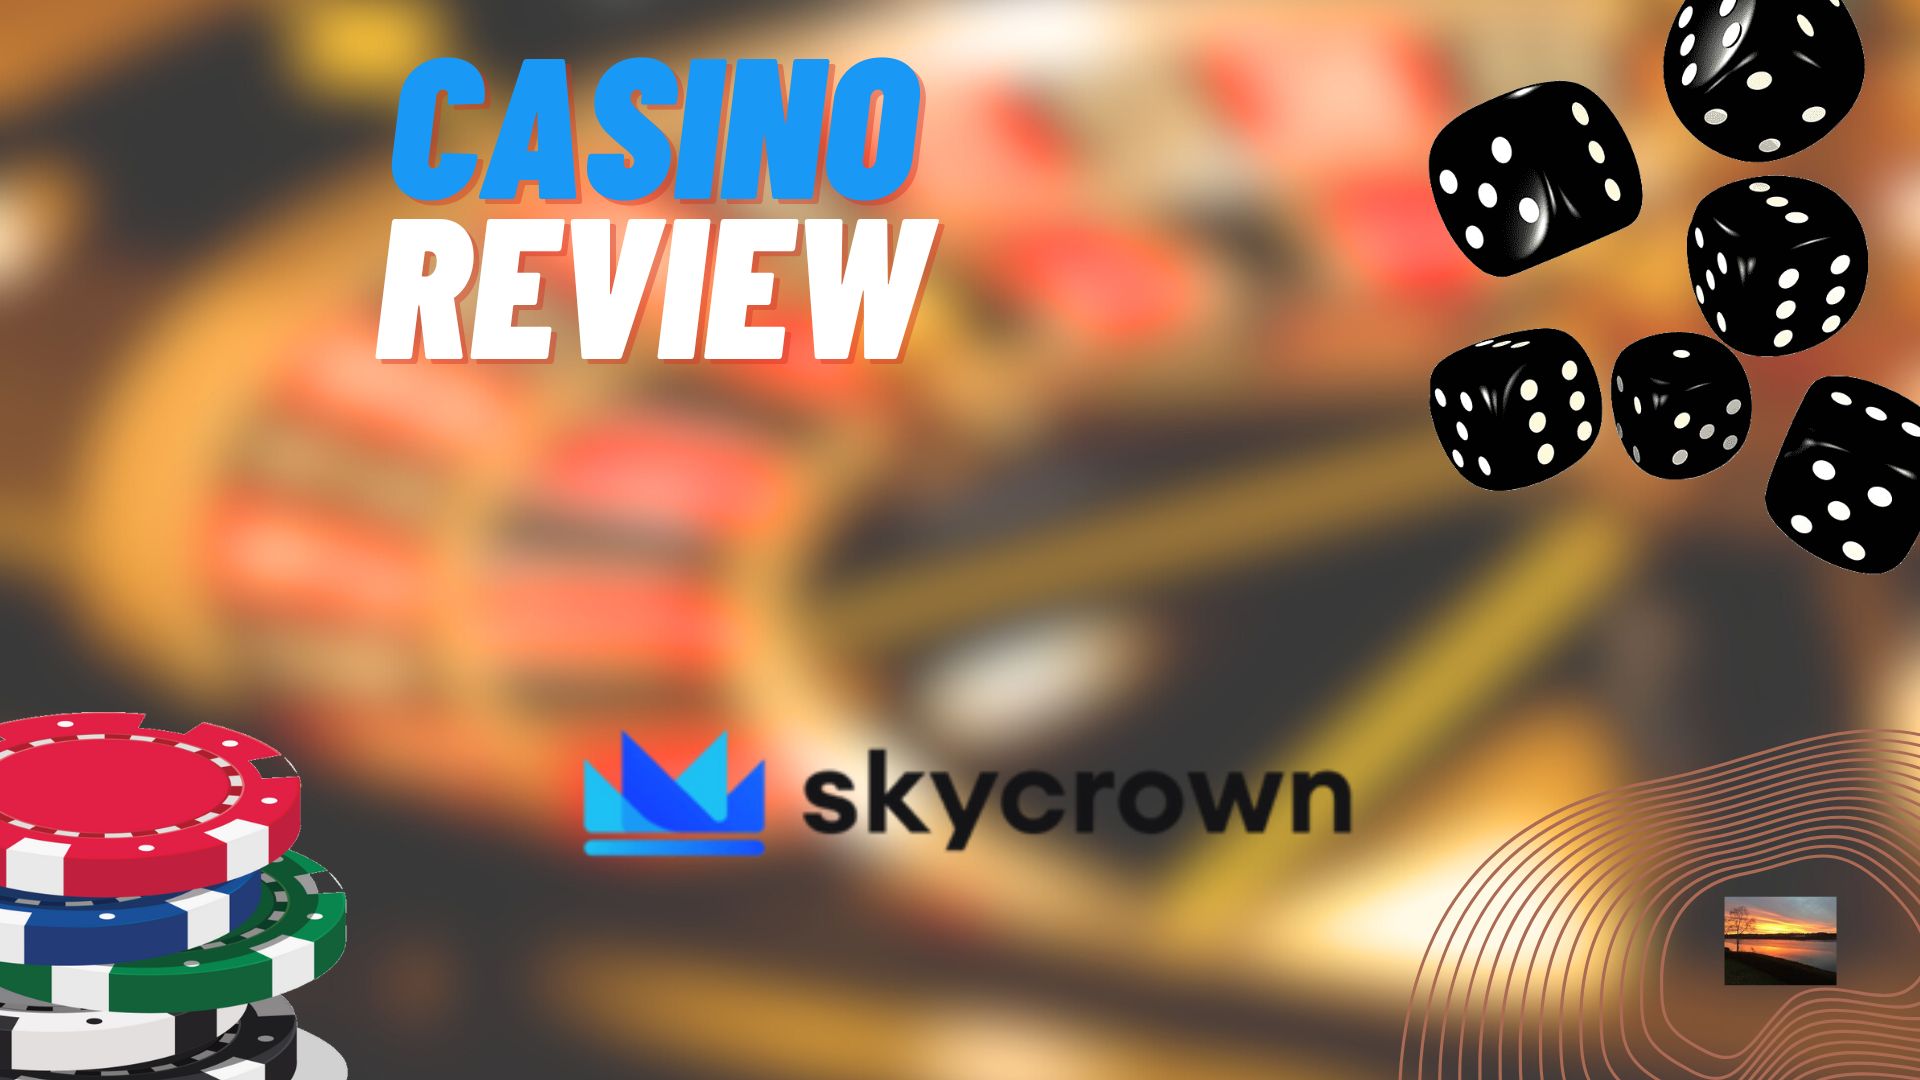 A look at the SkyCrown Casino